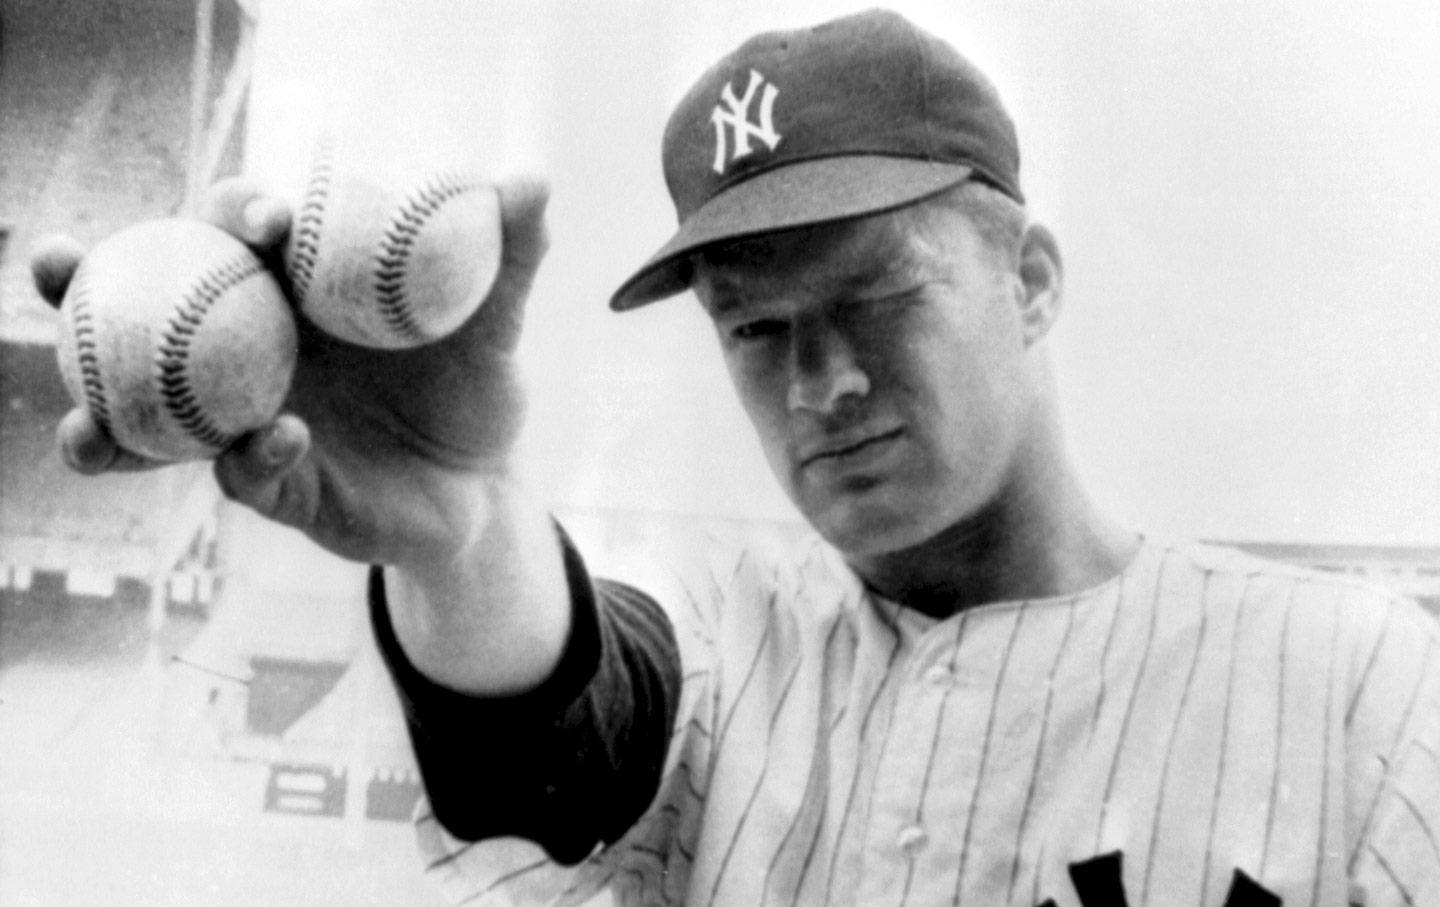 roger maris cause of death